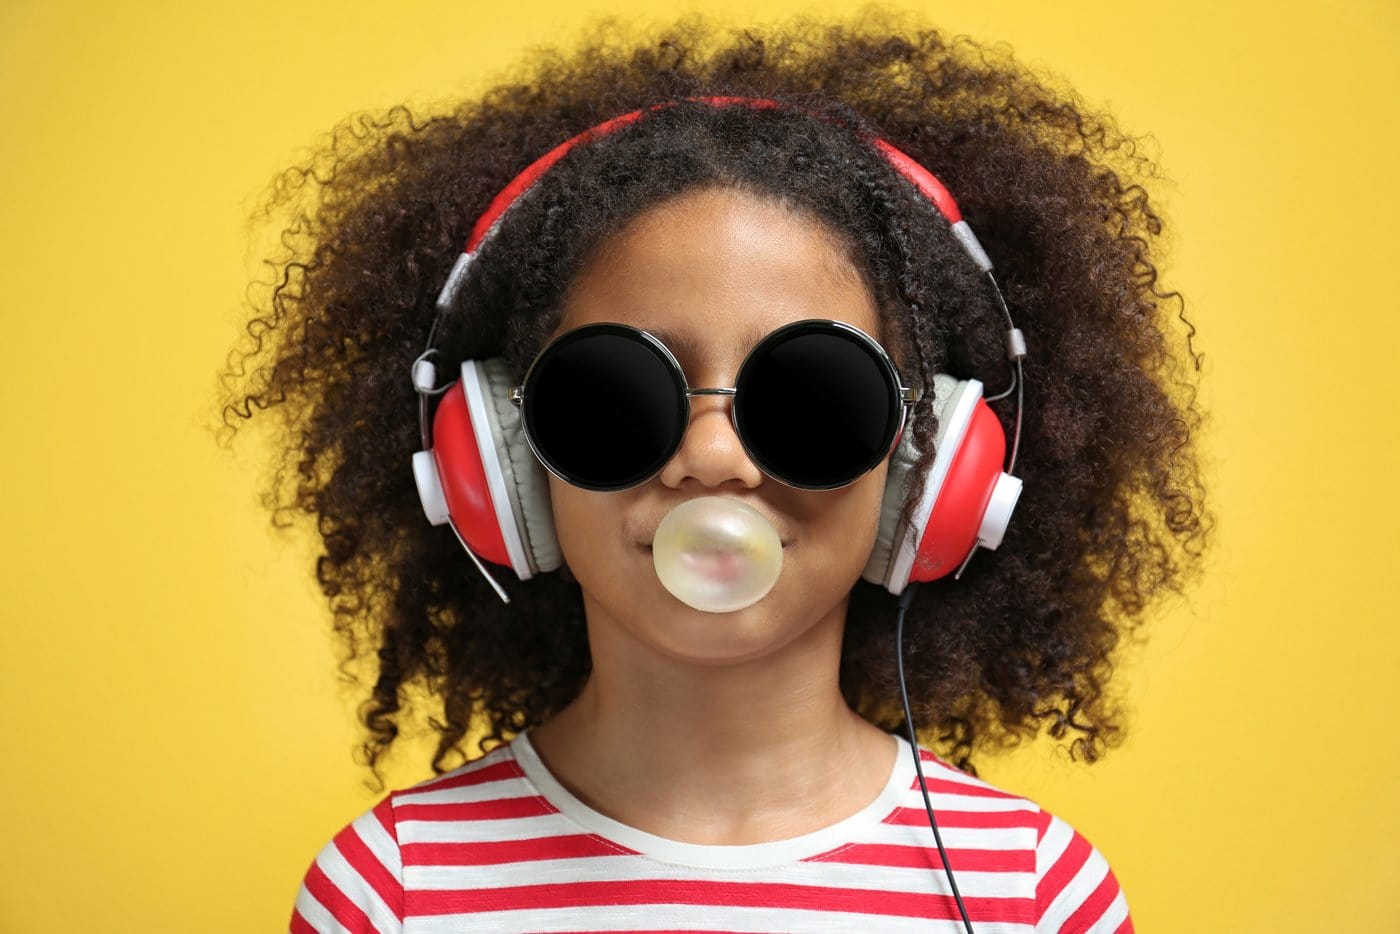 Girl with headphones blowing bubble gum